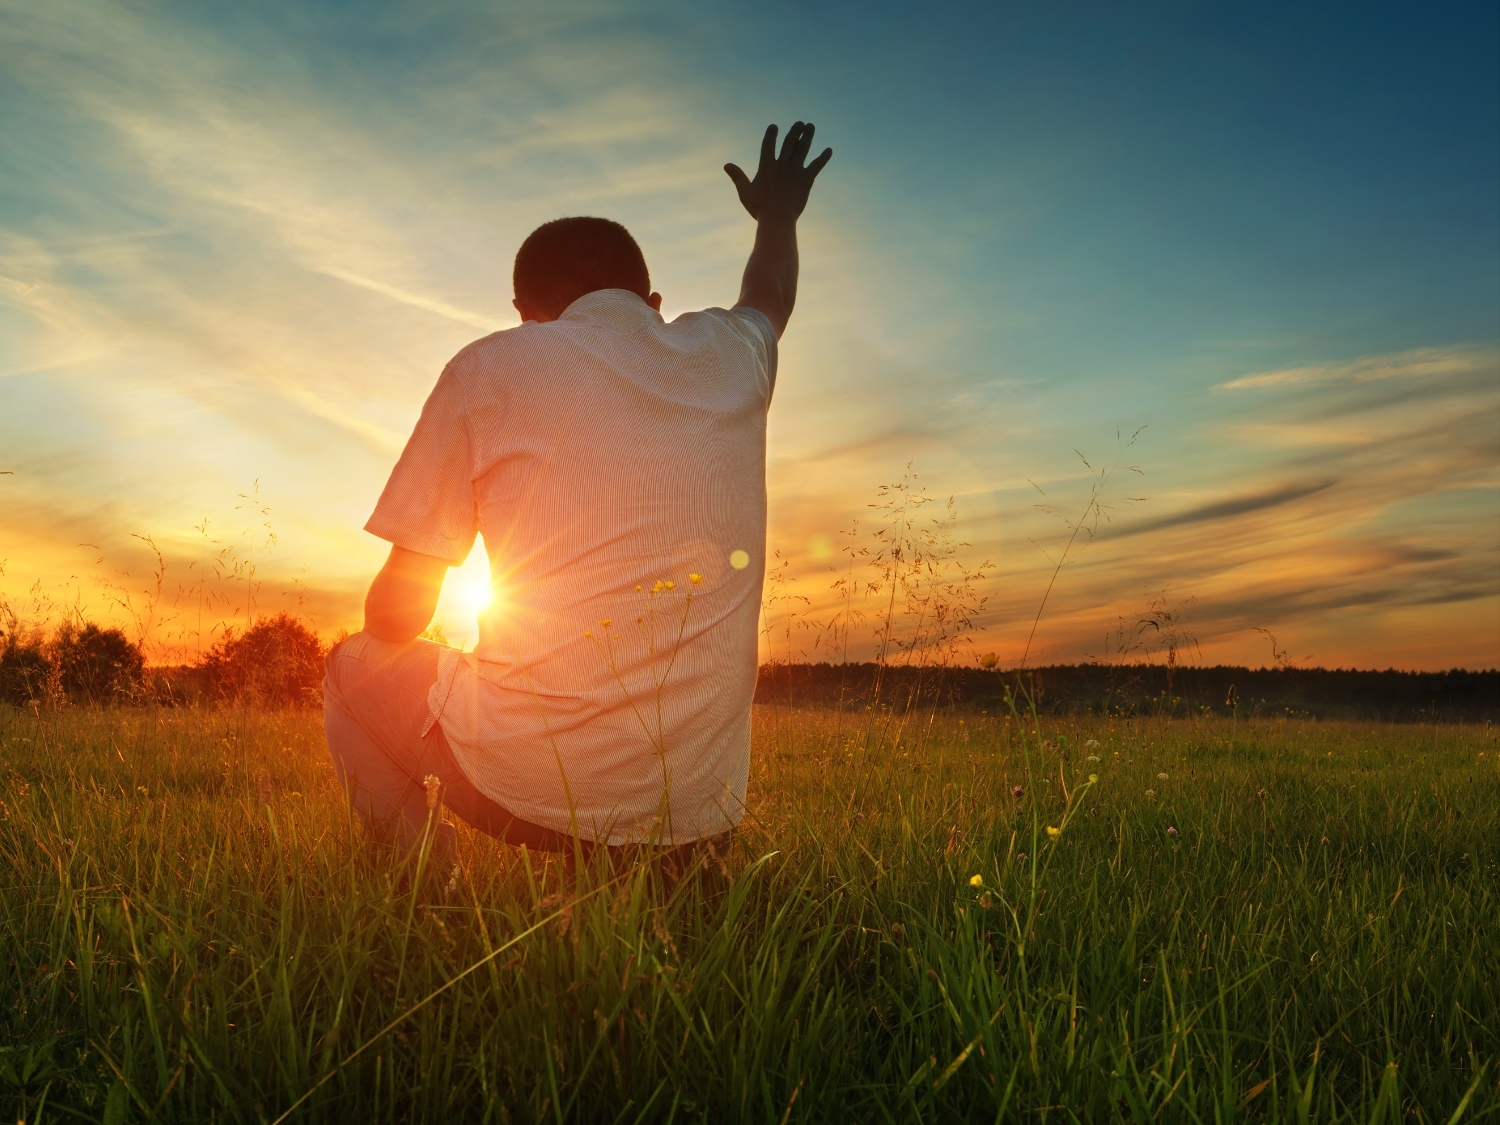 A man kneeling in a field praying with his hand raised